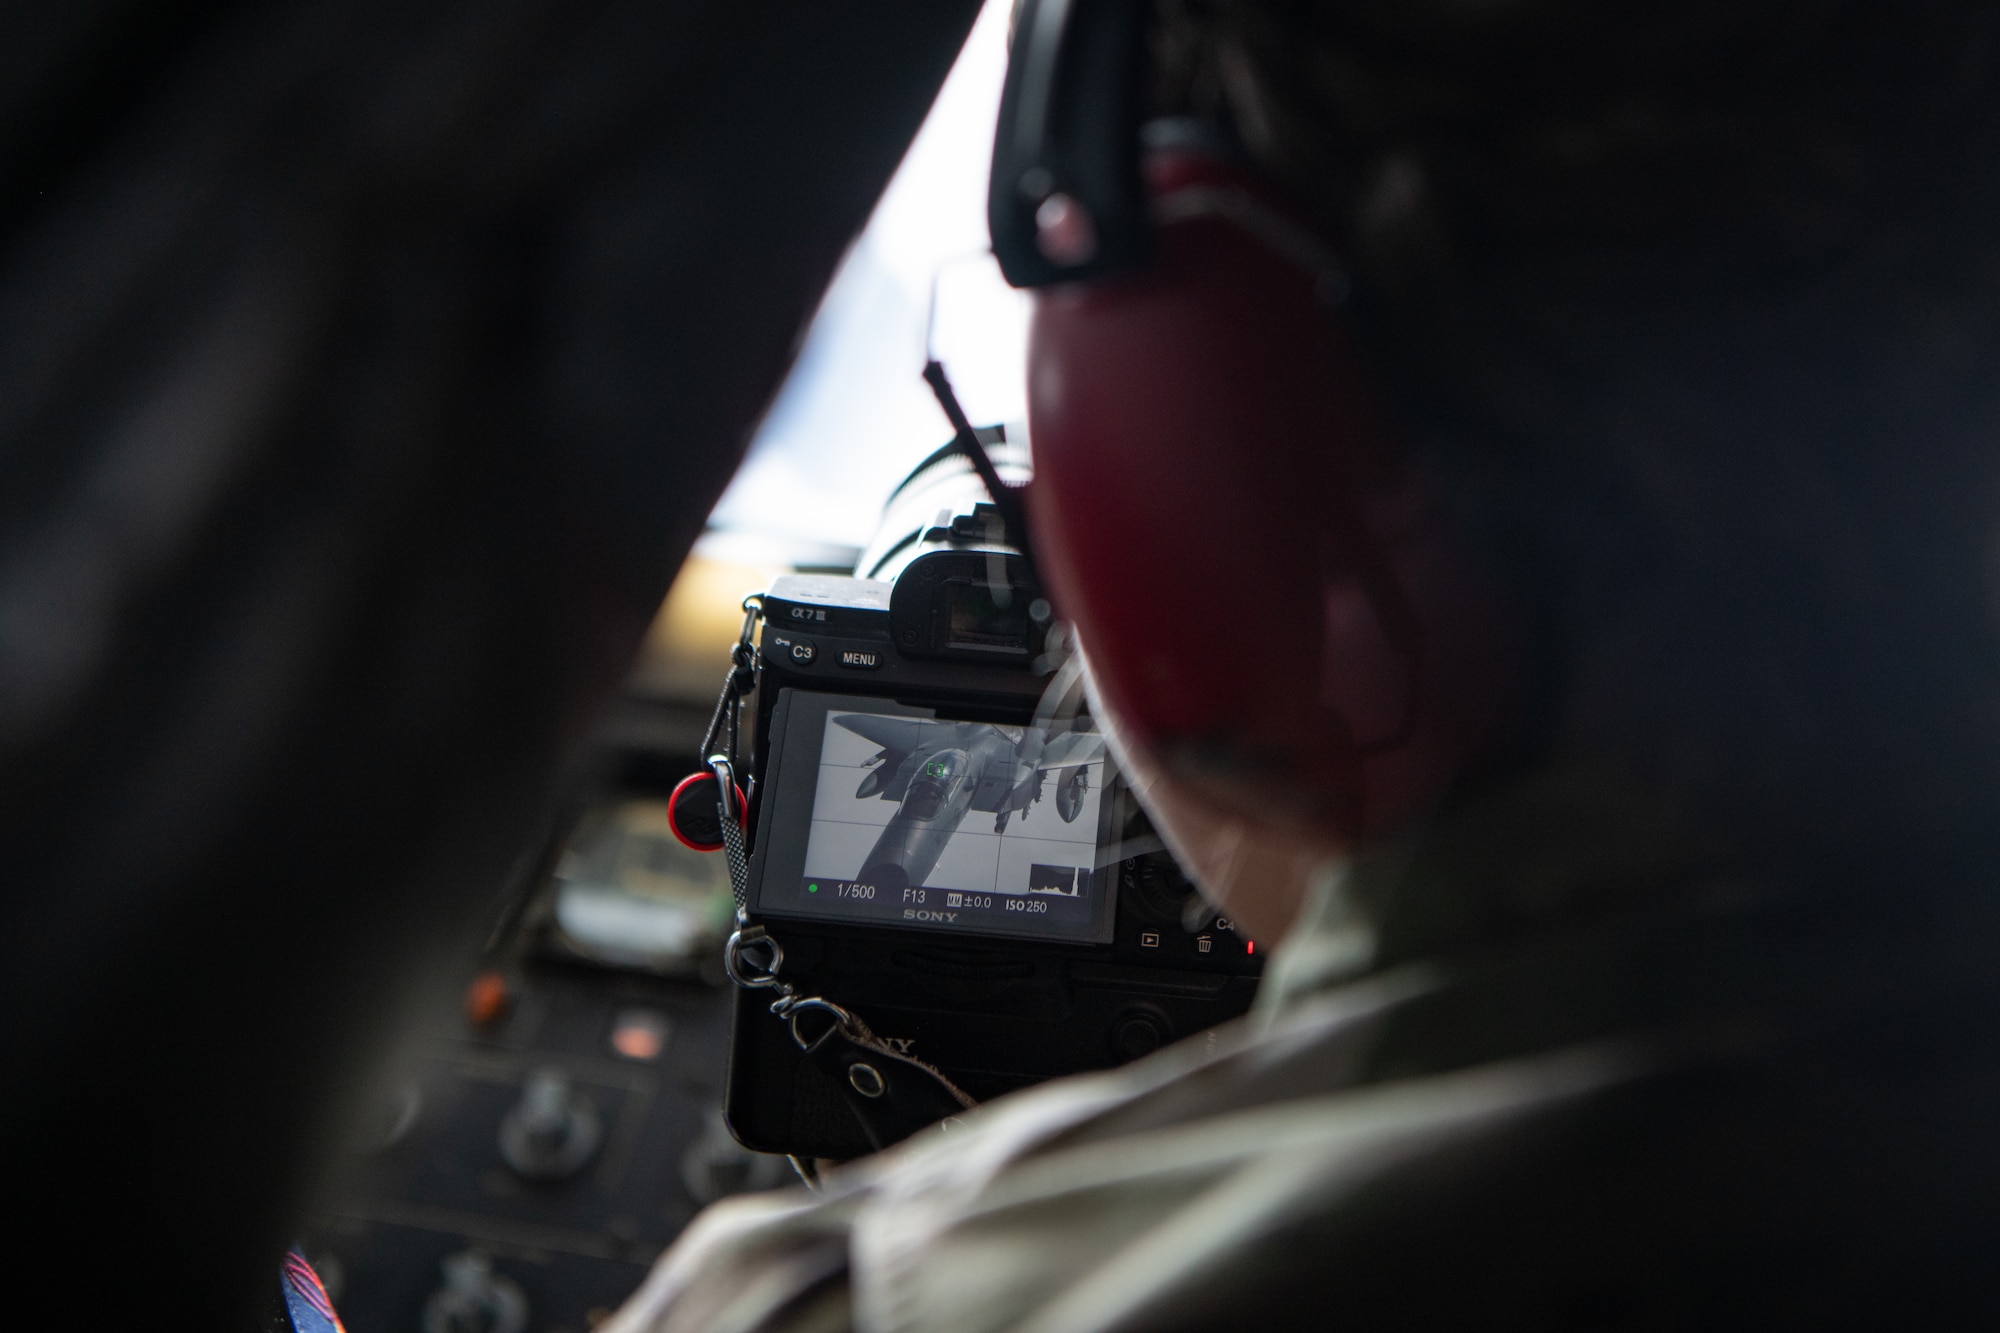 An airman holds a camera, showing a jet on the screen.